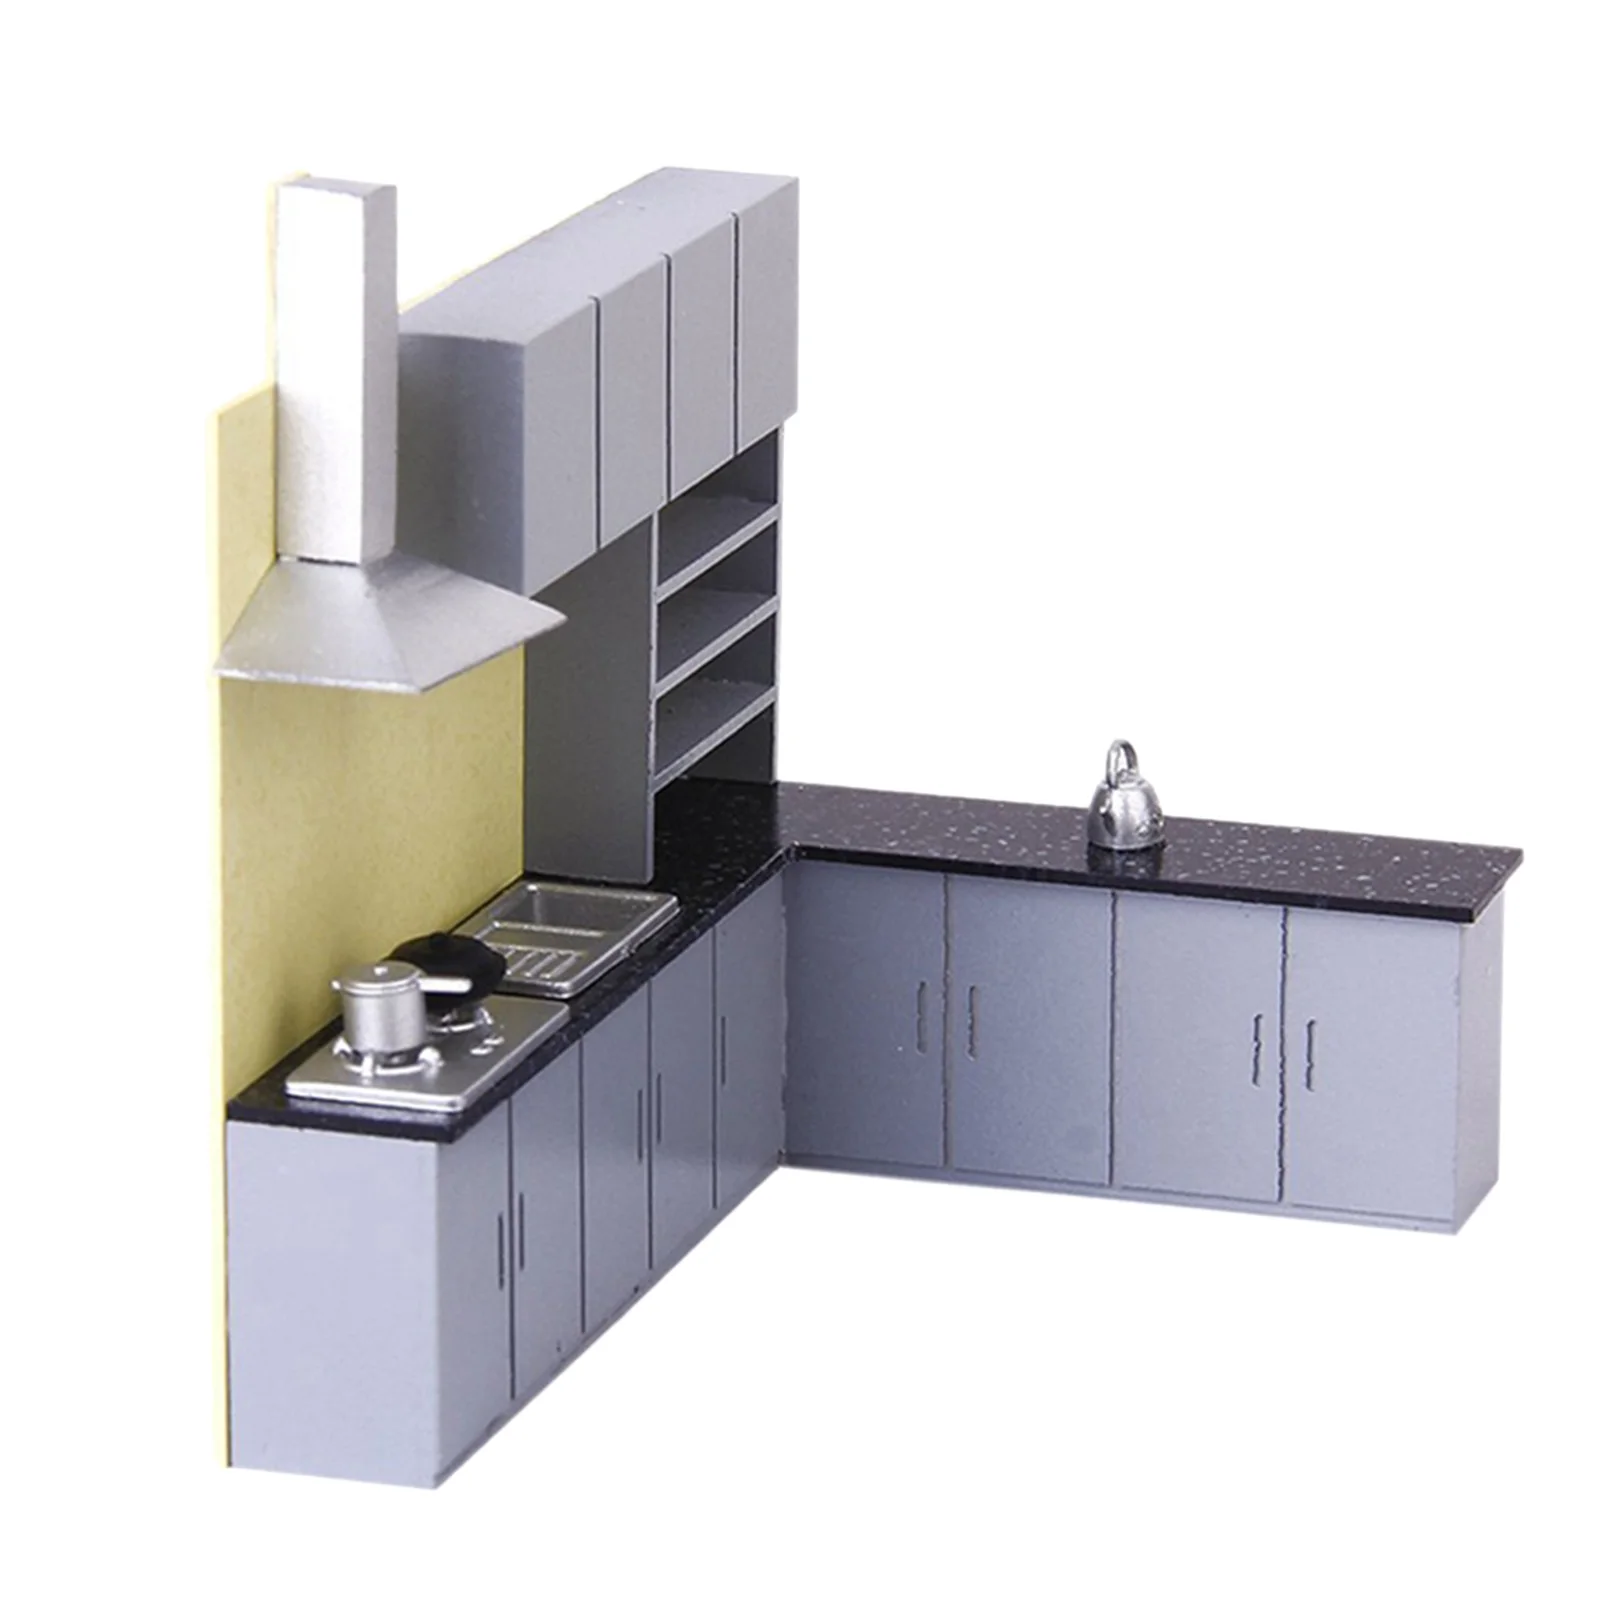 Dollhouse Cooker Stove Wash Basin Cooking Bench Modern Miniature Kitchen